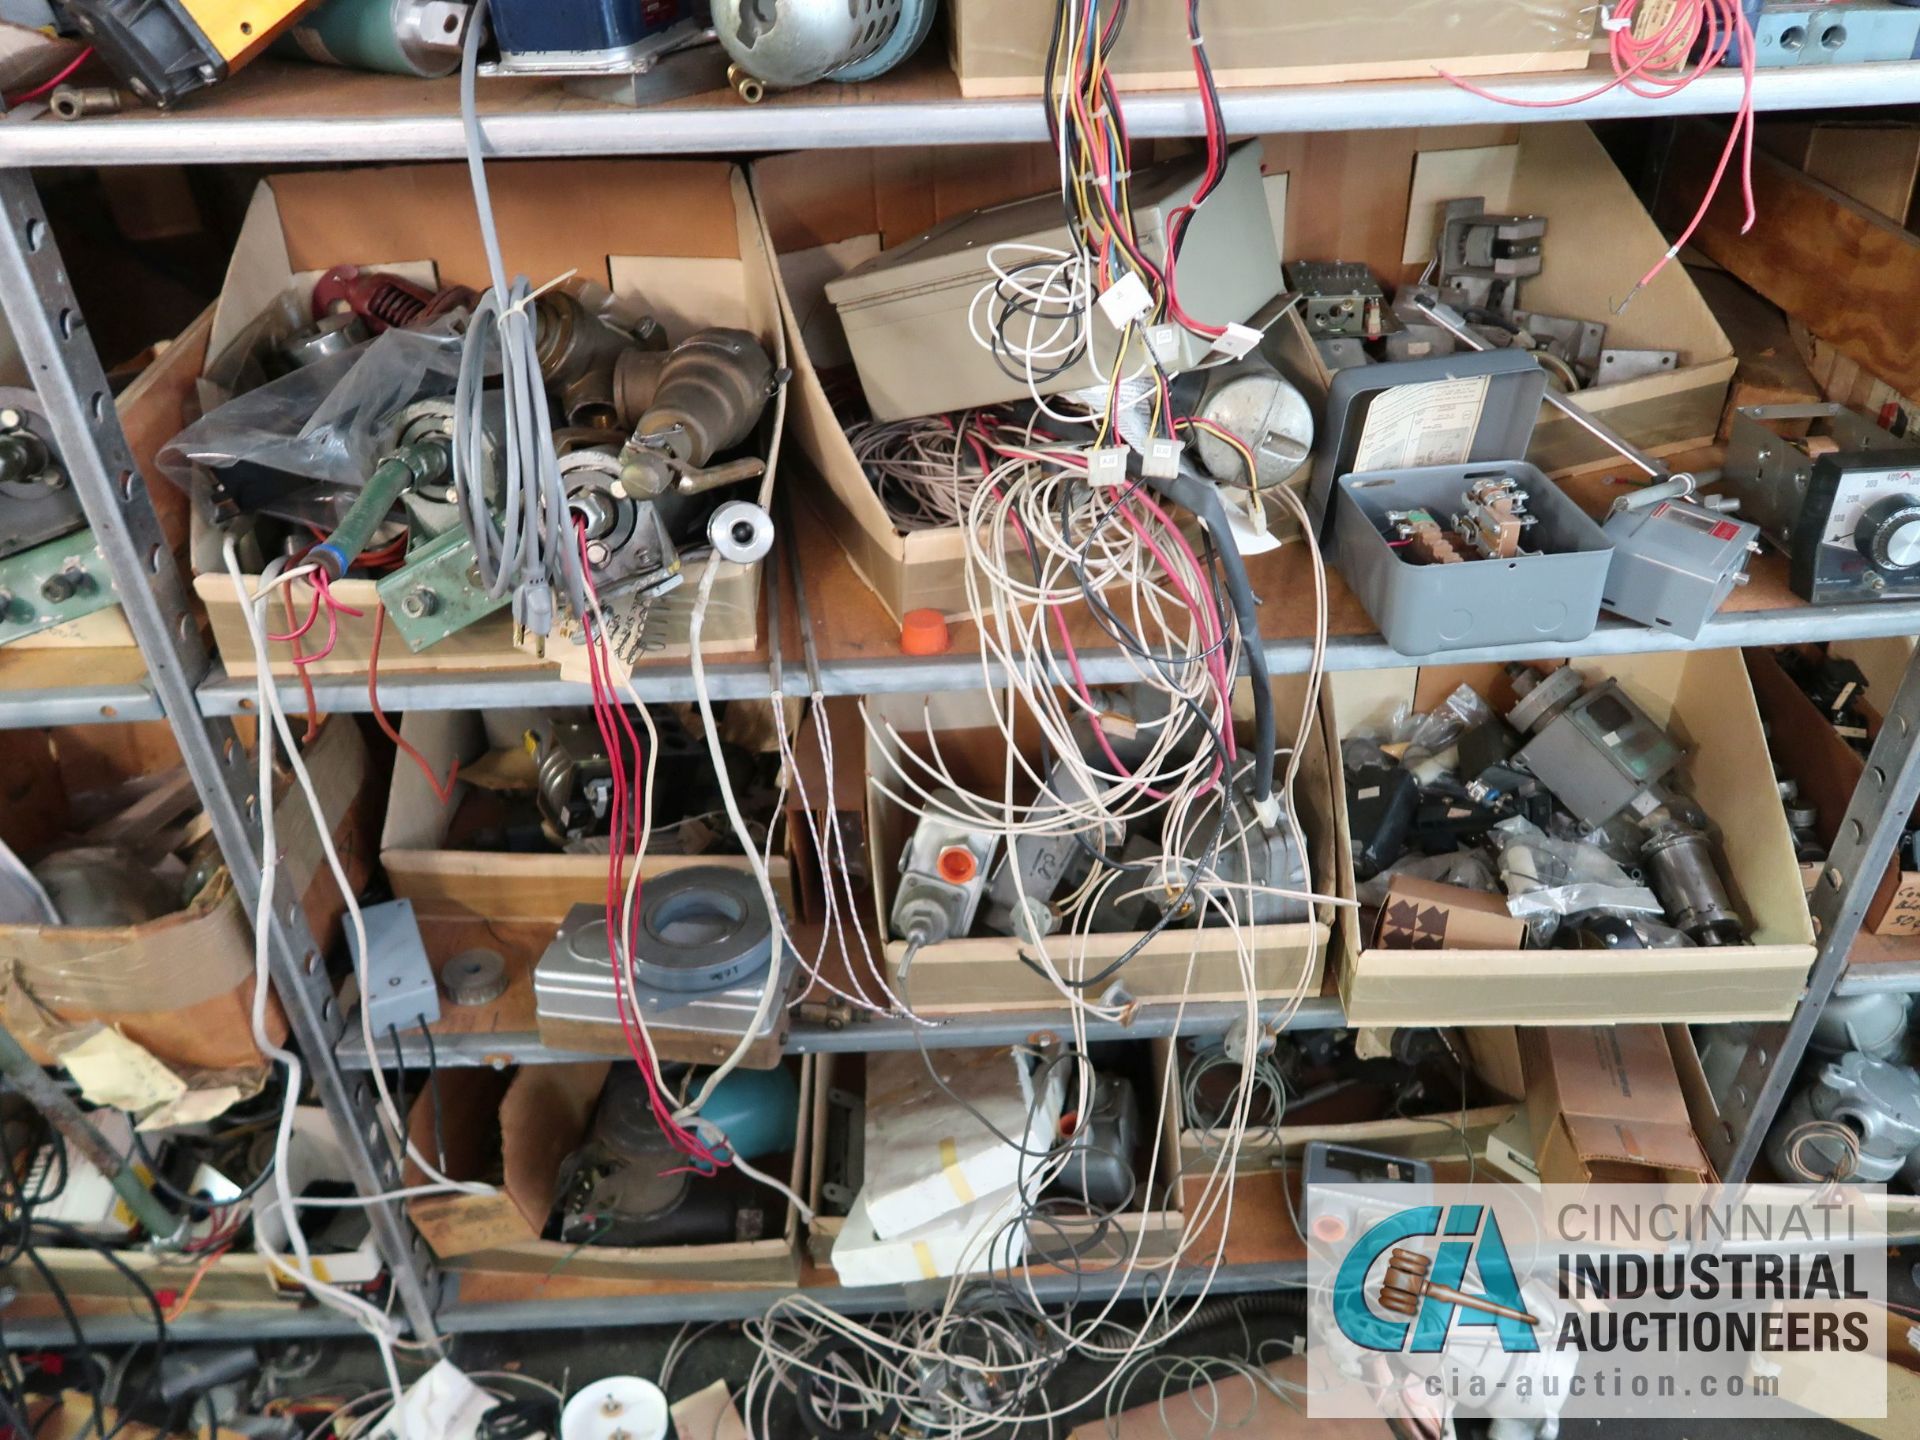 CONTENTS OF (16) SHELVES INCLUDING MISCELLANEOUS VALVES, THERMOSTATS, ANALYZERS, ELECTRICAL, CONTROL - Image 28 of 47